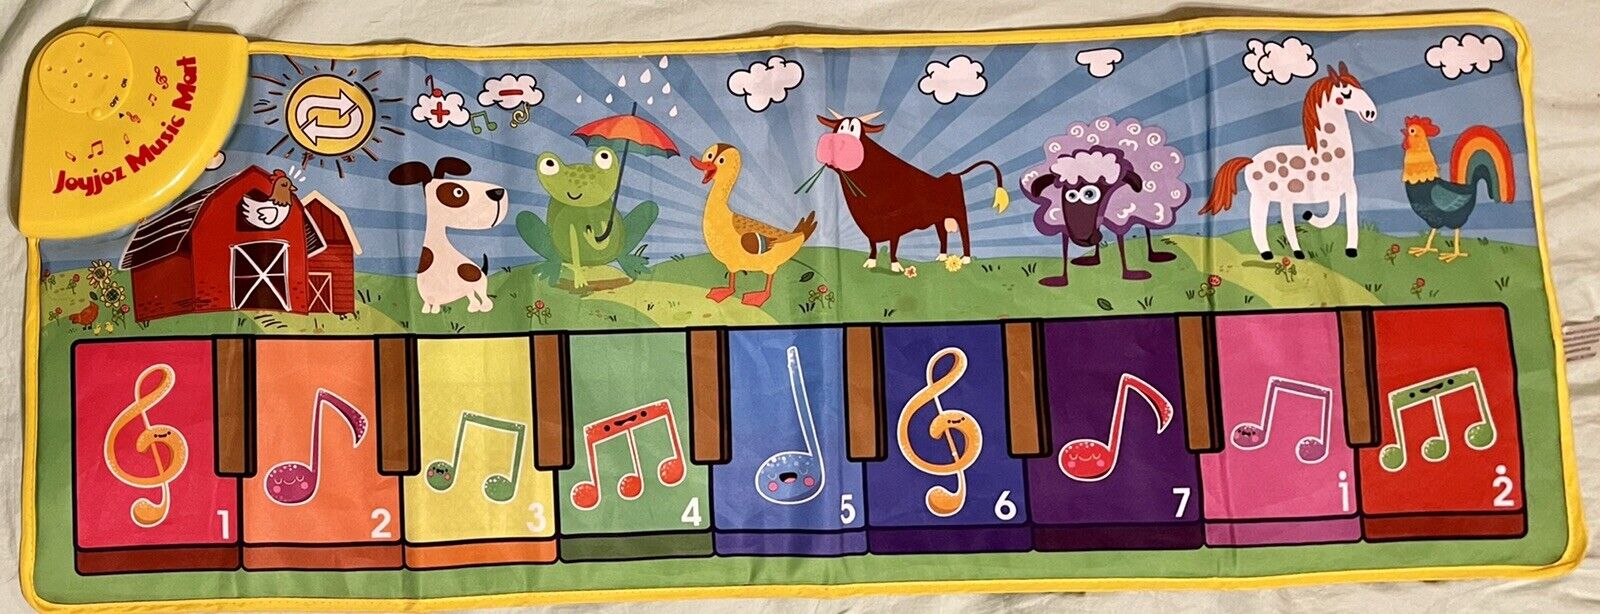 Kids Piano Playmat w 25 Musical Sounds 39 Inches Long Joyjoz Tested & Works